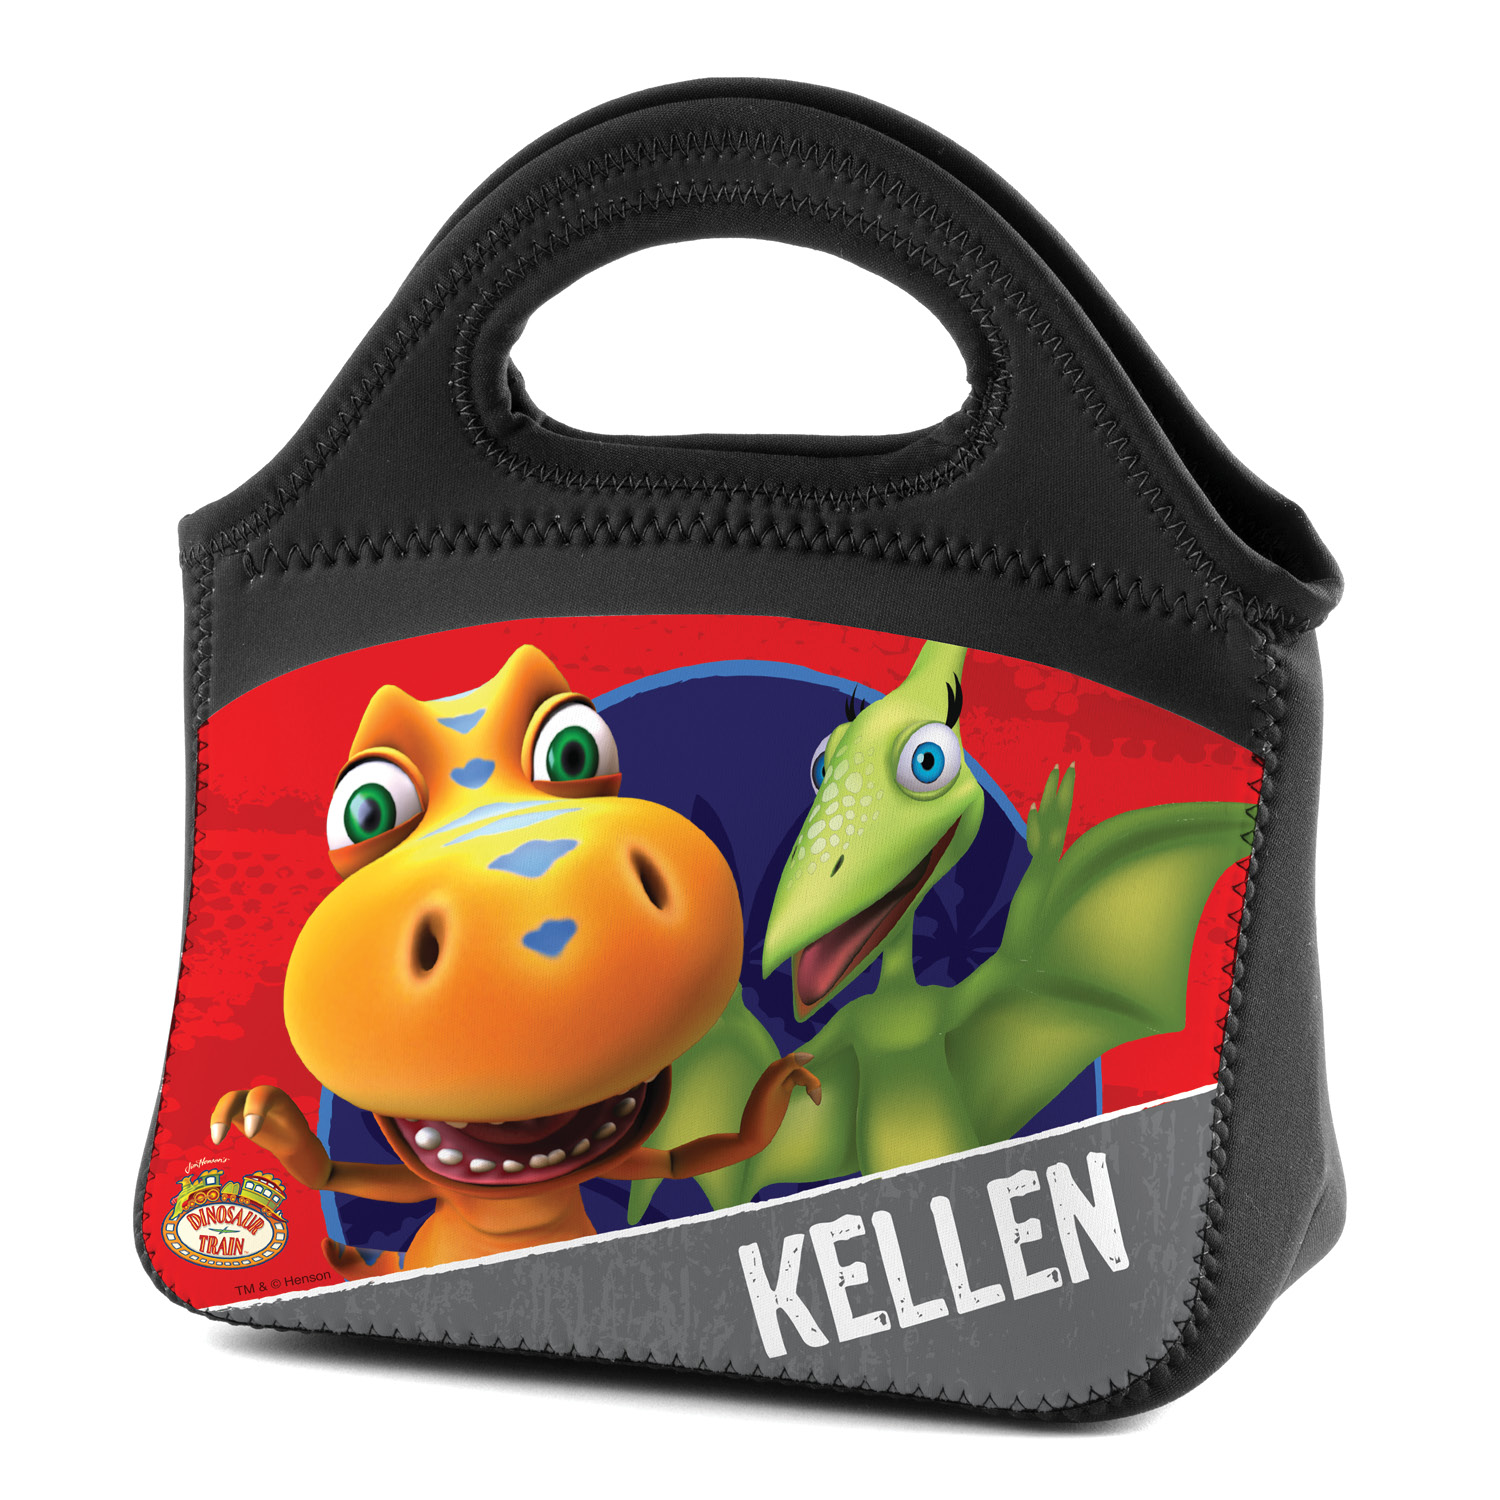 Dinosaur Train Red Lunch Tote